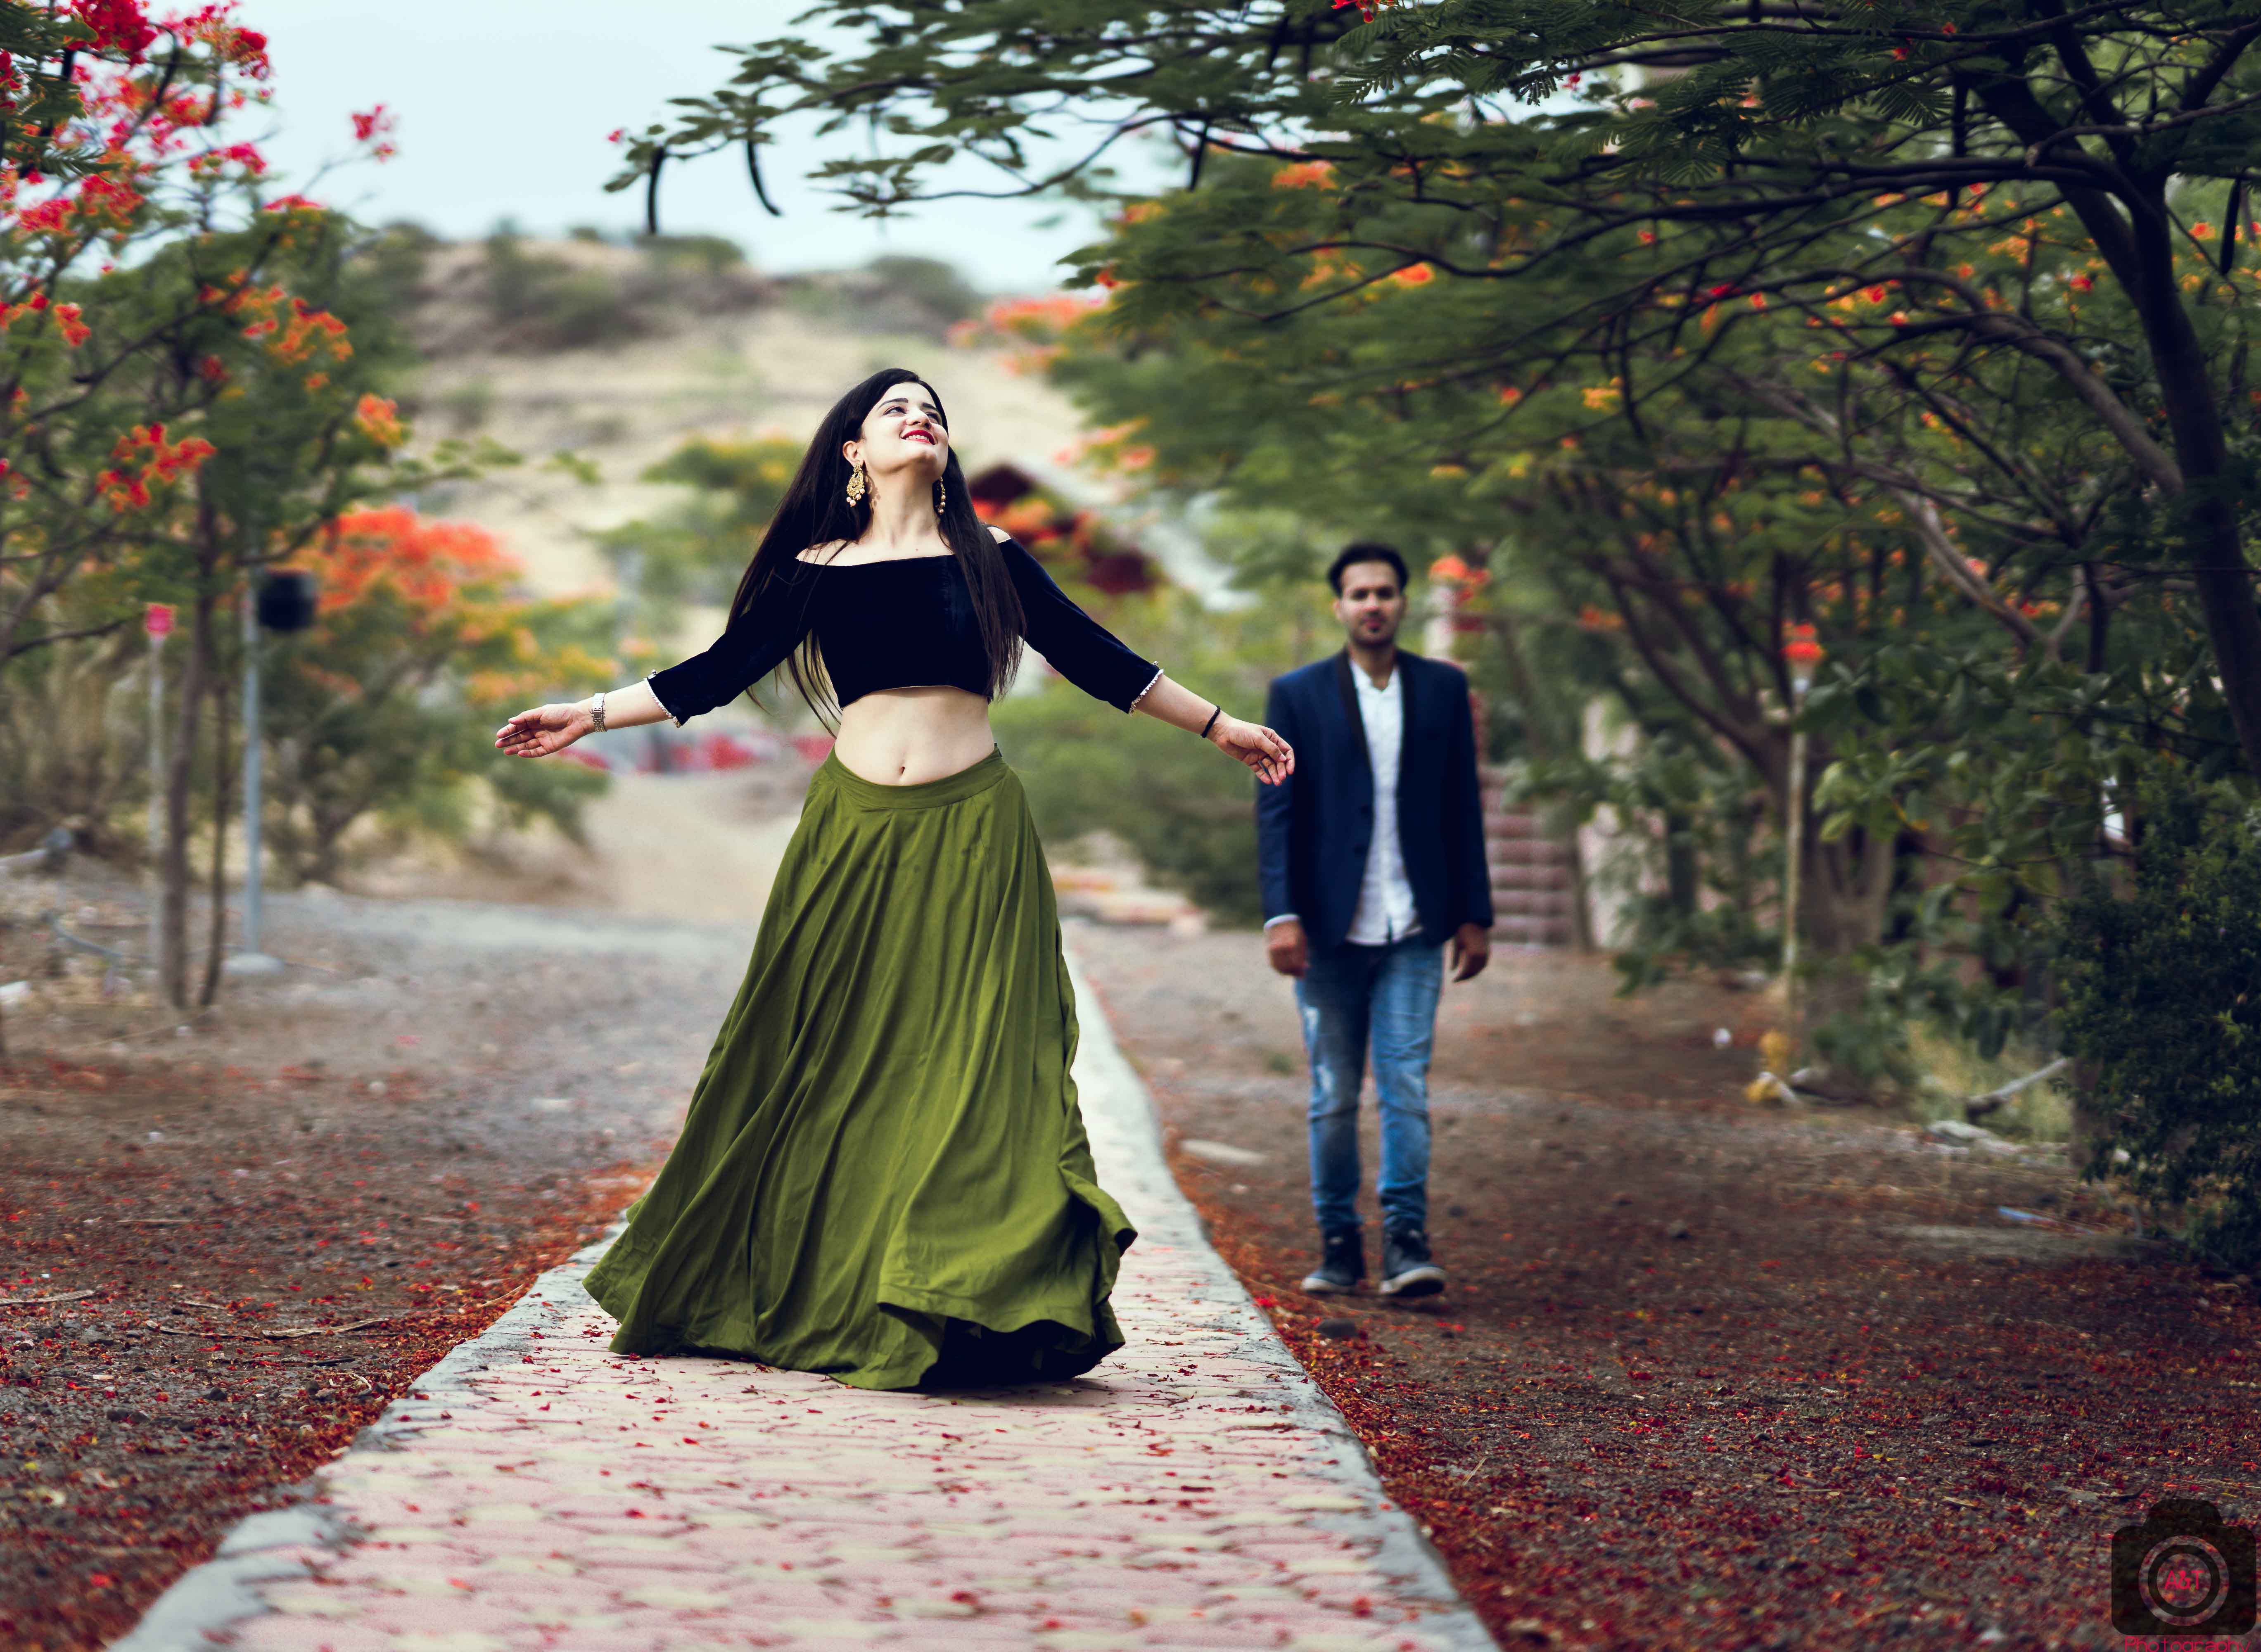 Dreamy Pre-wedding Pictures from Shilpa & Pulkit's Photoshoot in Pune, India. 